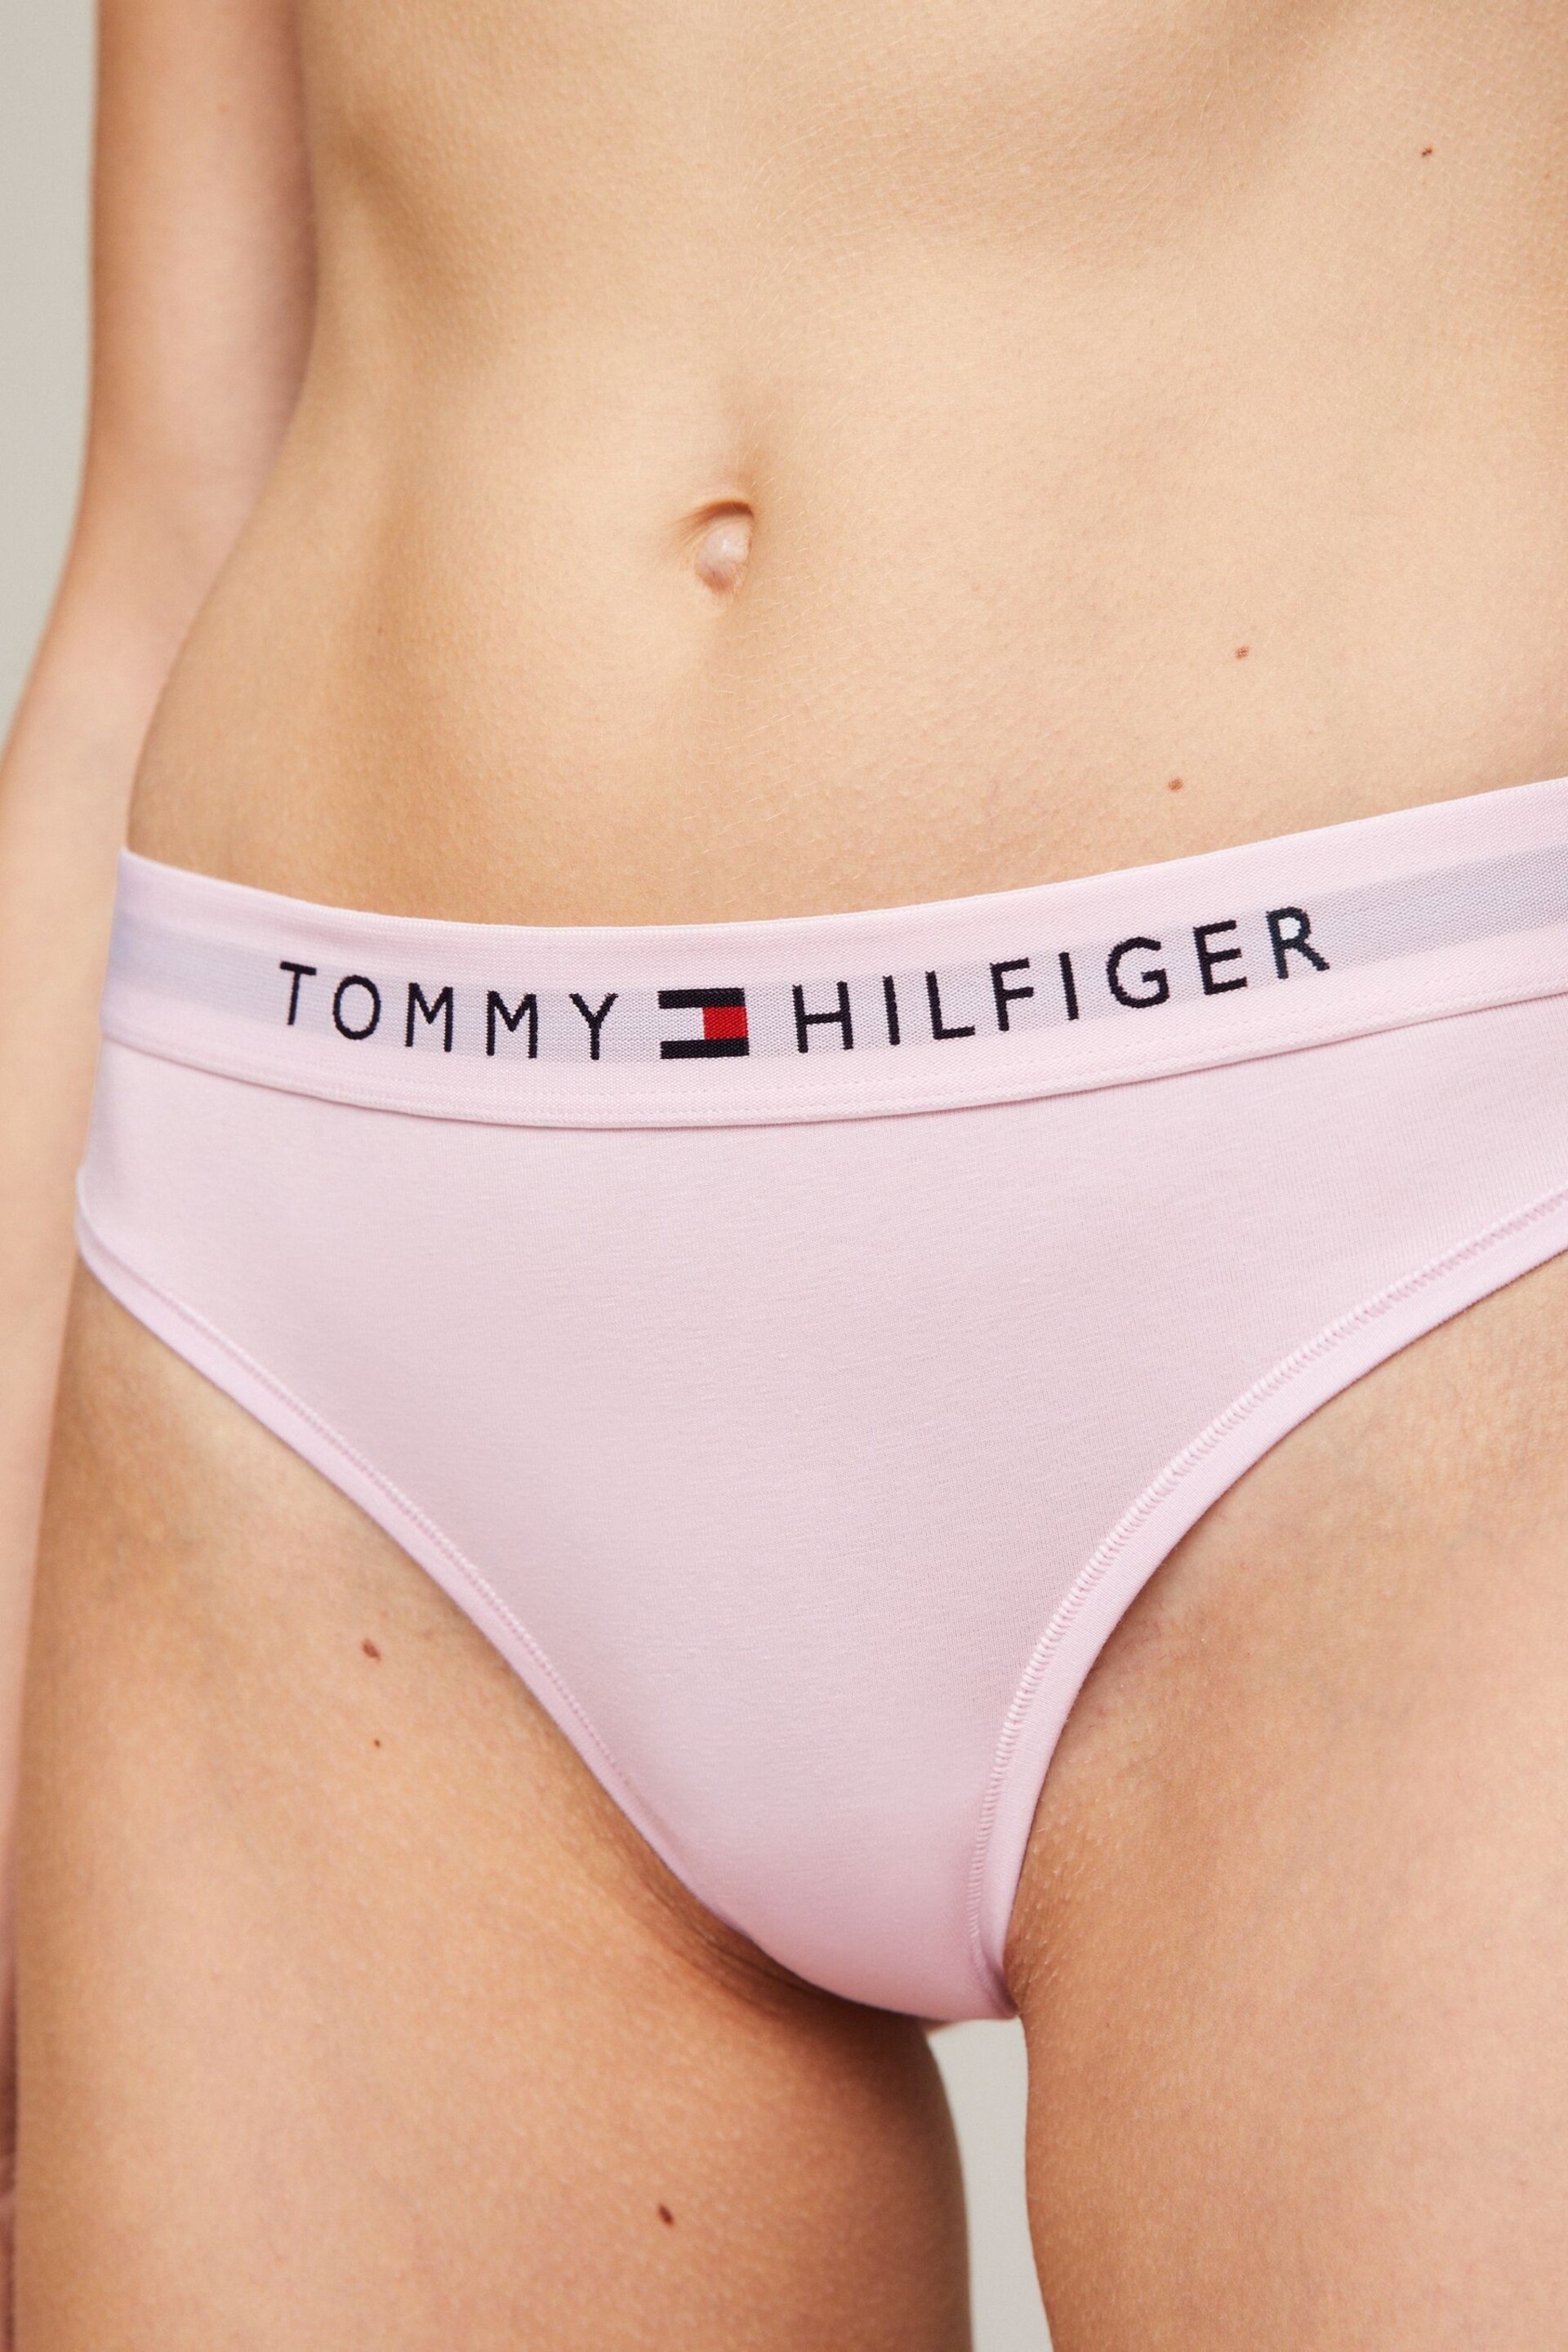 Tommy Hilfiger Pink Thongs - Image 1 of 7